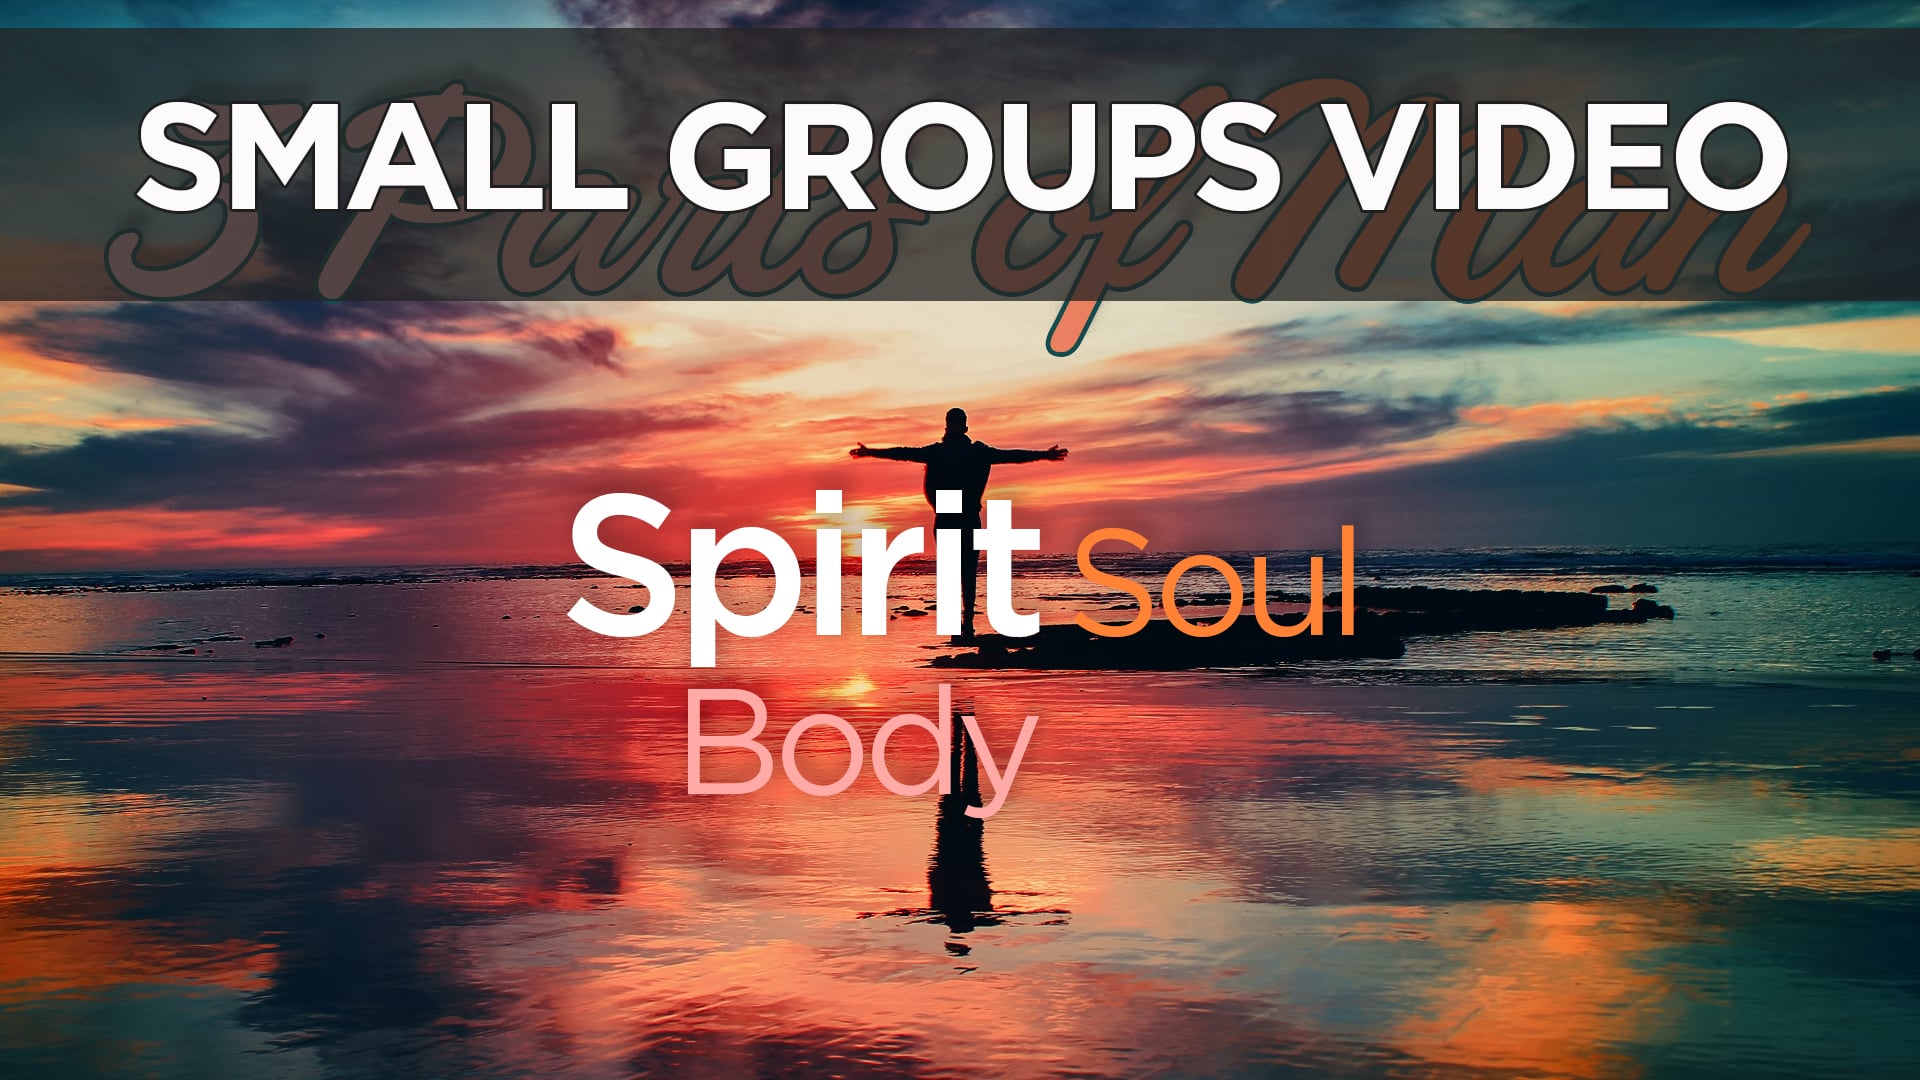 Small Groups Video - 6 Weeks of Body, Soul, Spirit  - Session 2